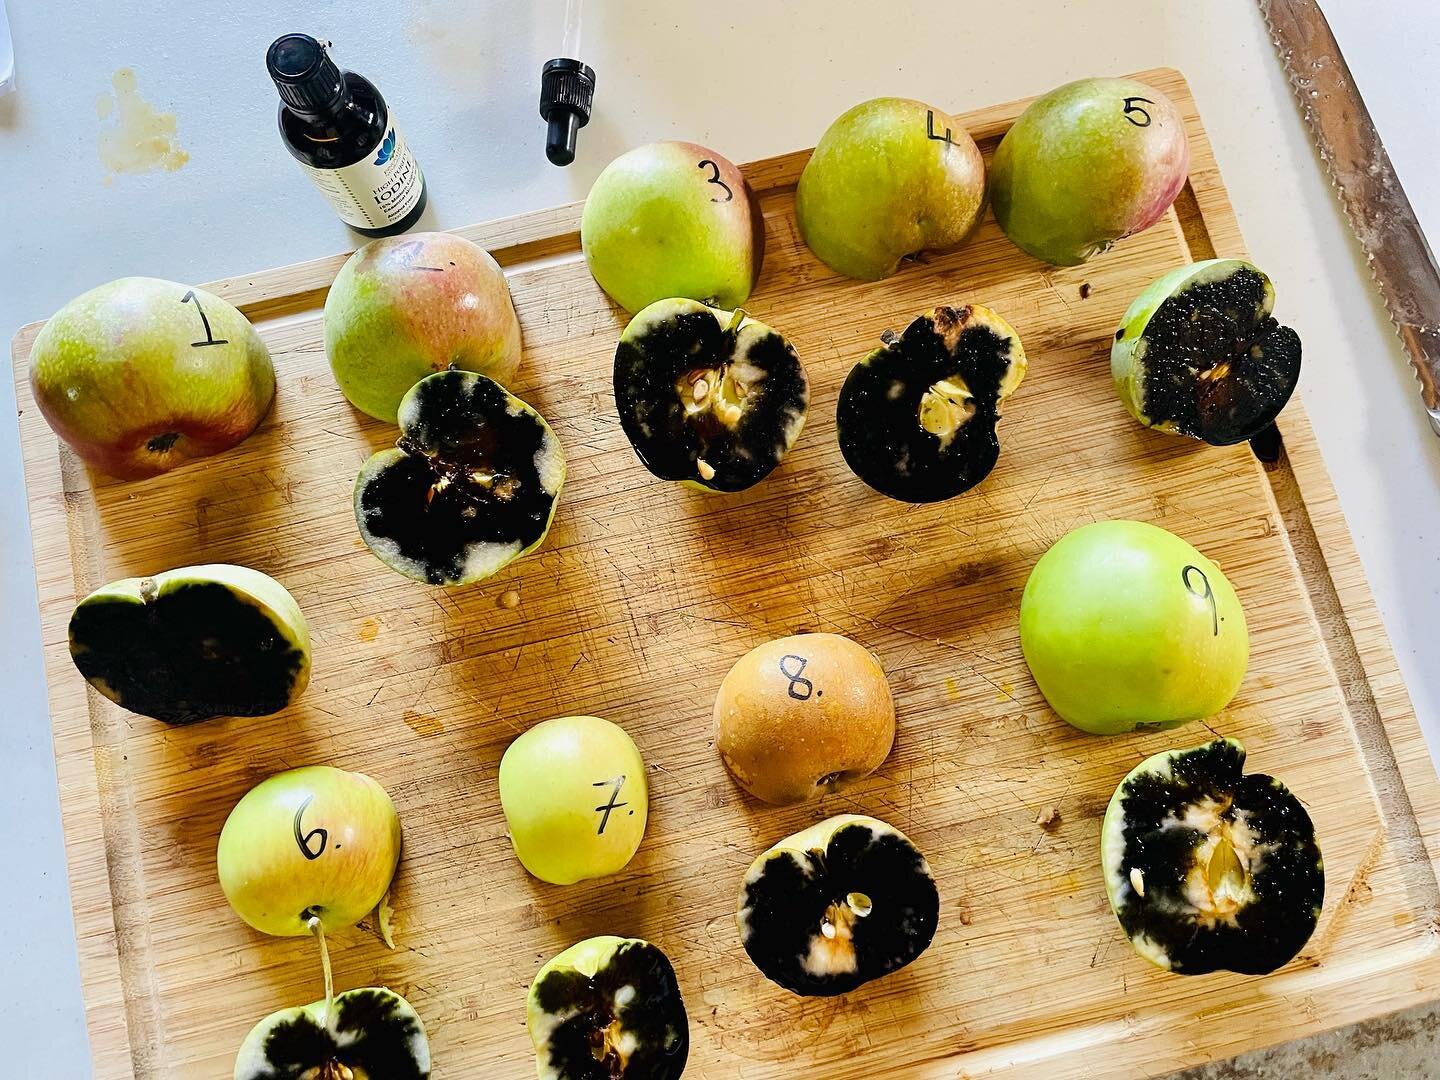 Science&rsquo;ing.

We use taste to pick at full ripeness but, when in doubt, we also use iodine to test for starch/sugar levels. A few drops of iodine added, if it goes black, it&rsquo;s starch, not sugar&hellip;unripe.

A couple more weeks at least